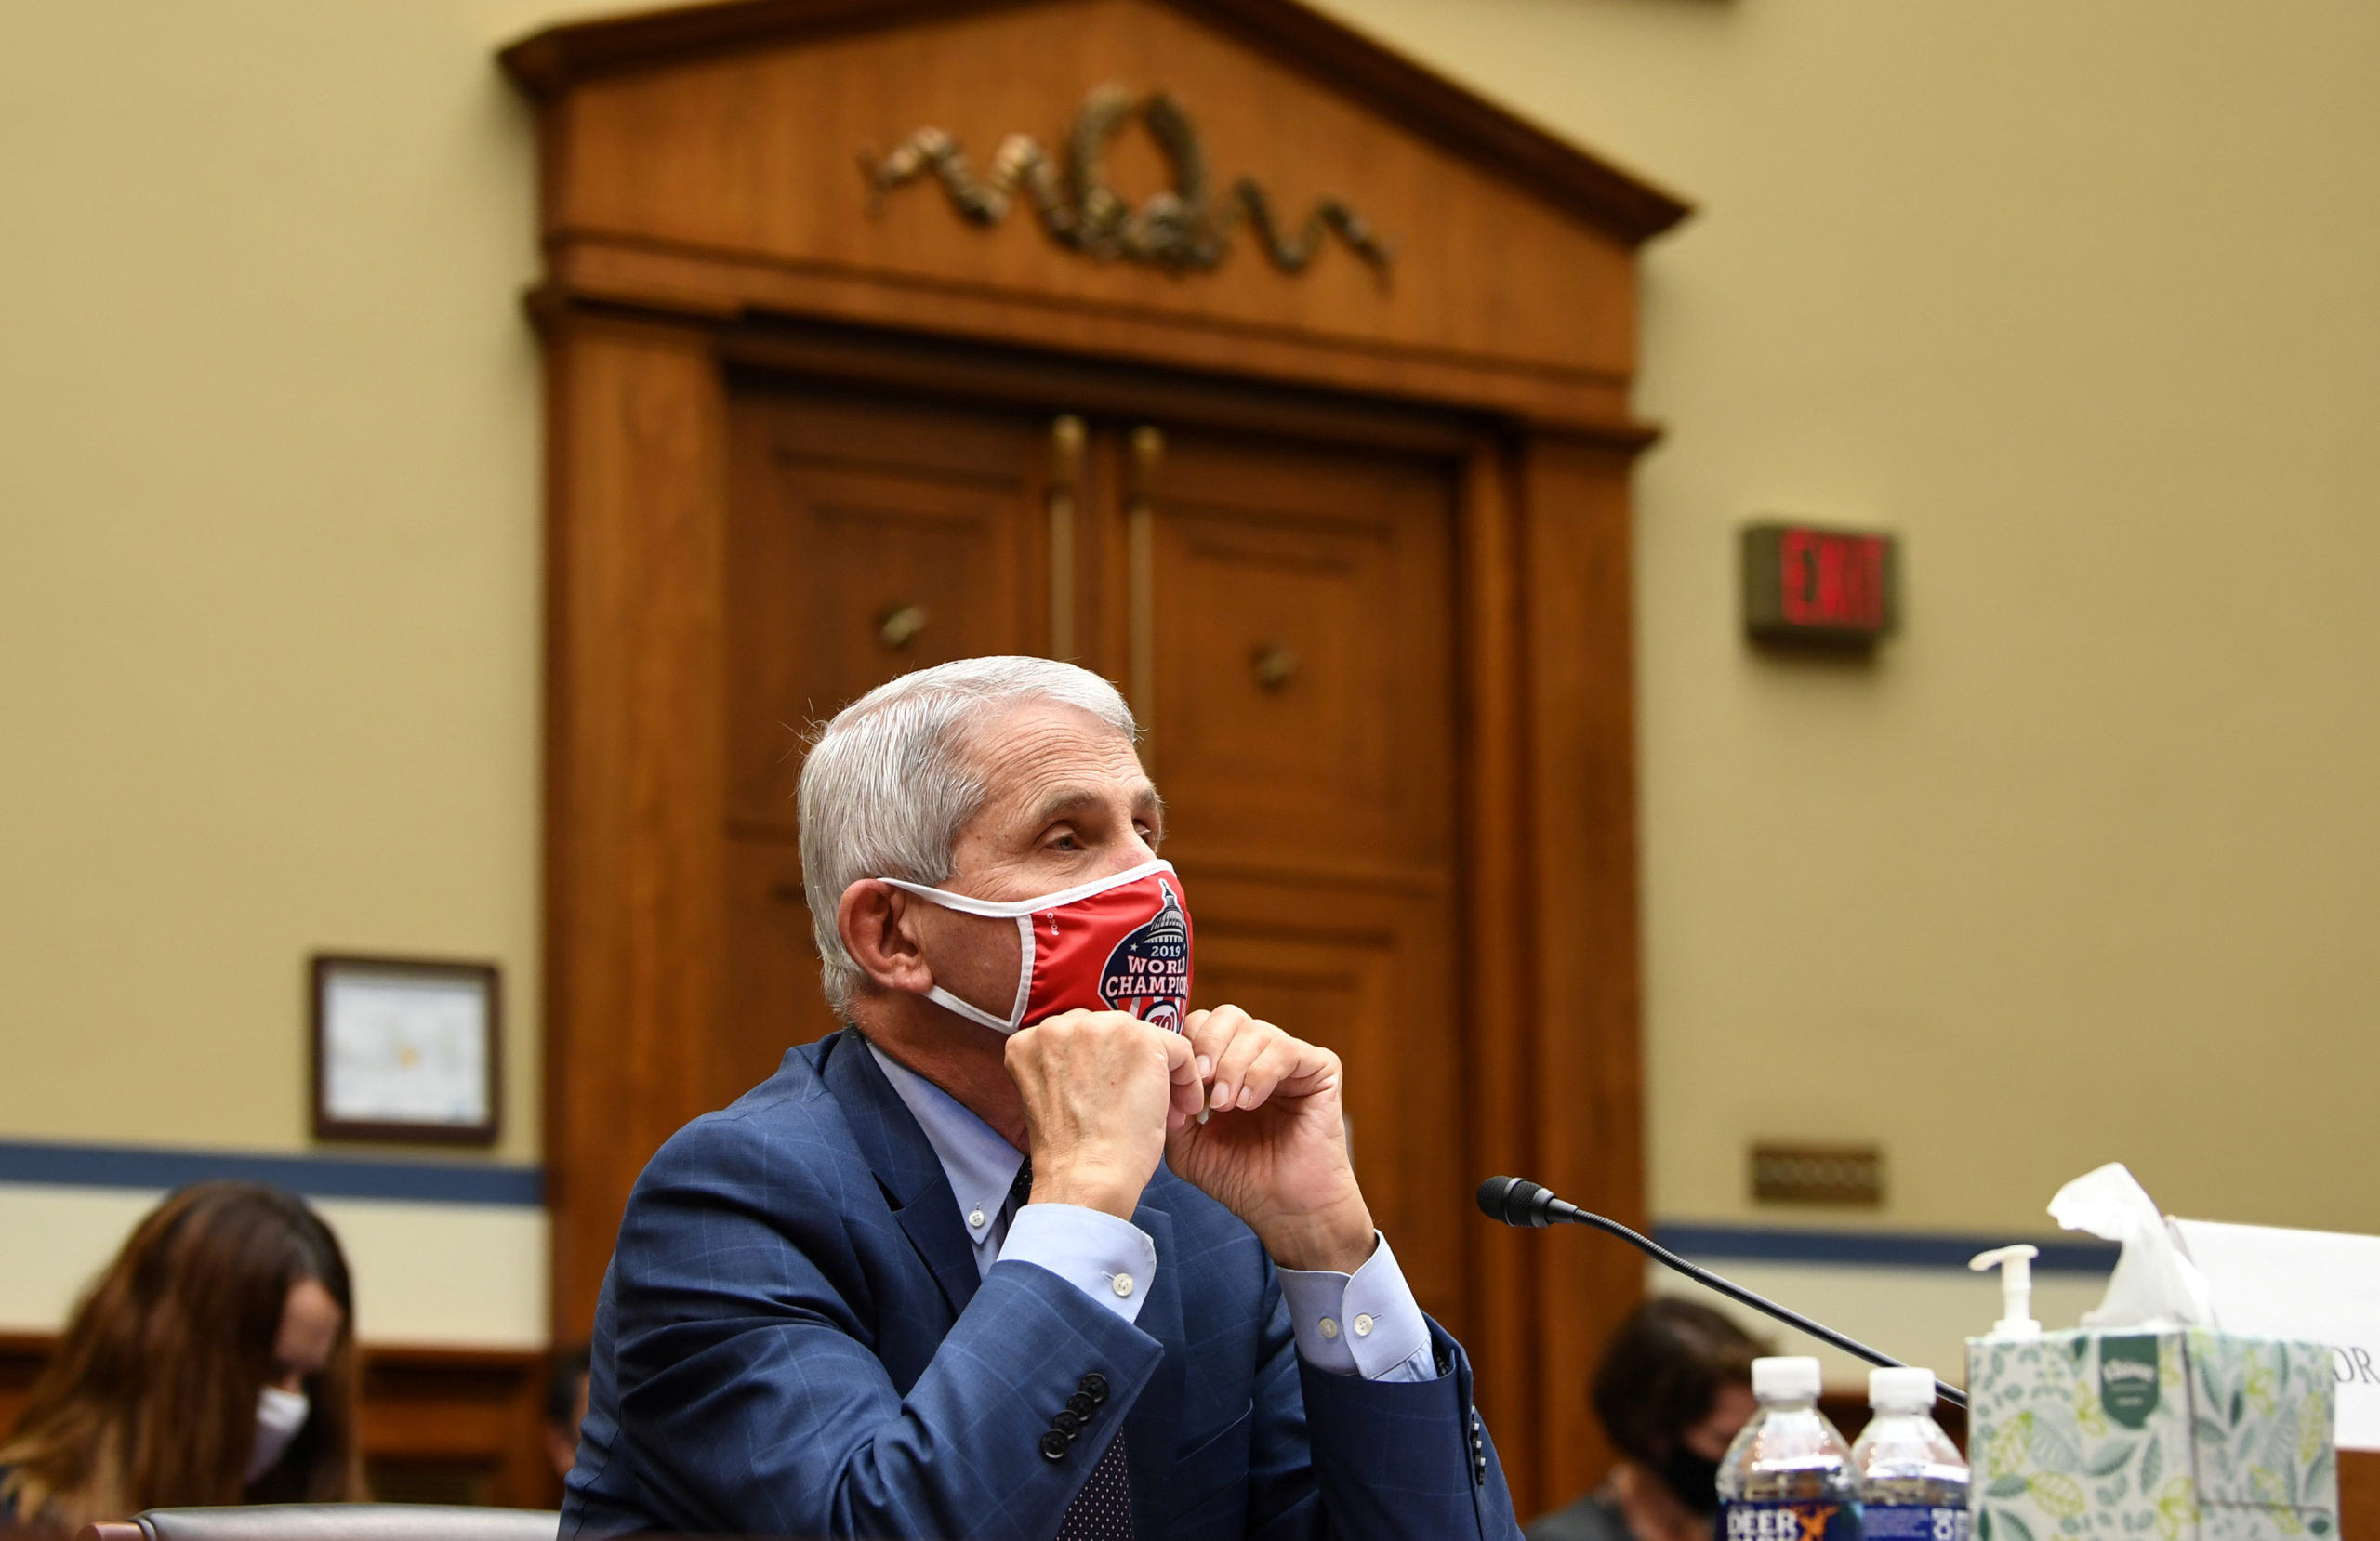 Dr. Anthony Fauci, director of the National Institute for Allergy and Infectious Diseases, arrives to testify before the House Select Subcommittee on the Coronavirus Crisis hearing in Washington, D.C., U.S., July 31, 2020. Kevin Dietsch/Pool via REUTERS